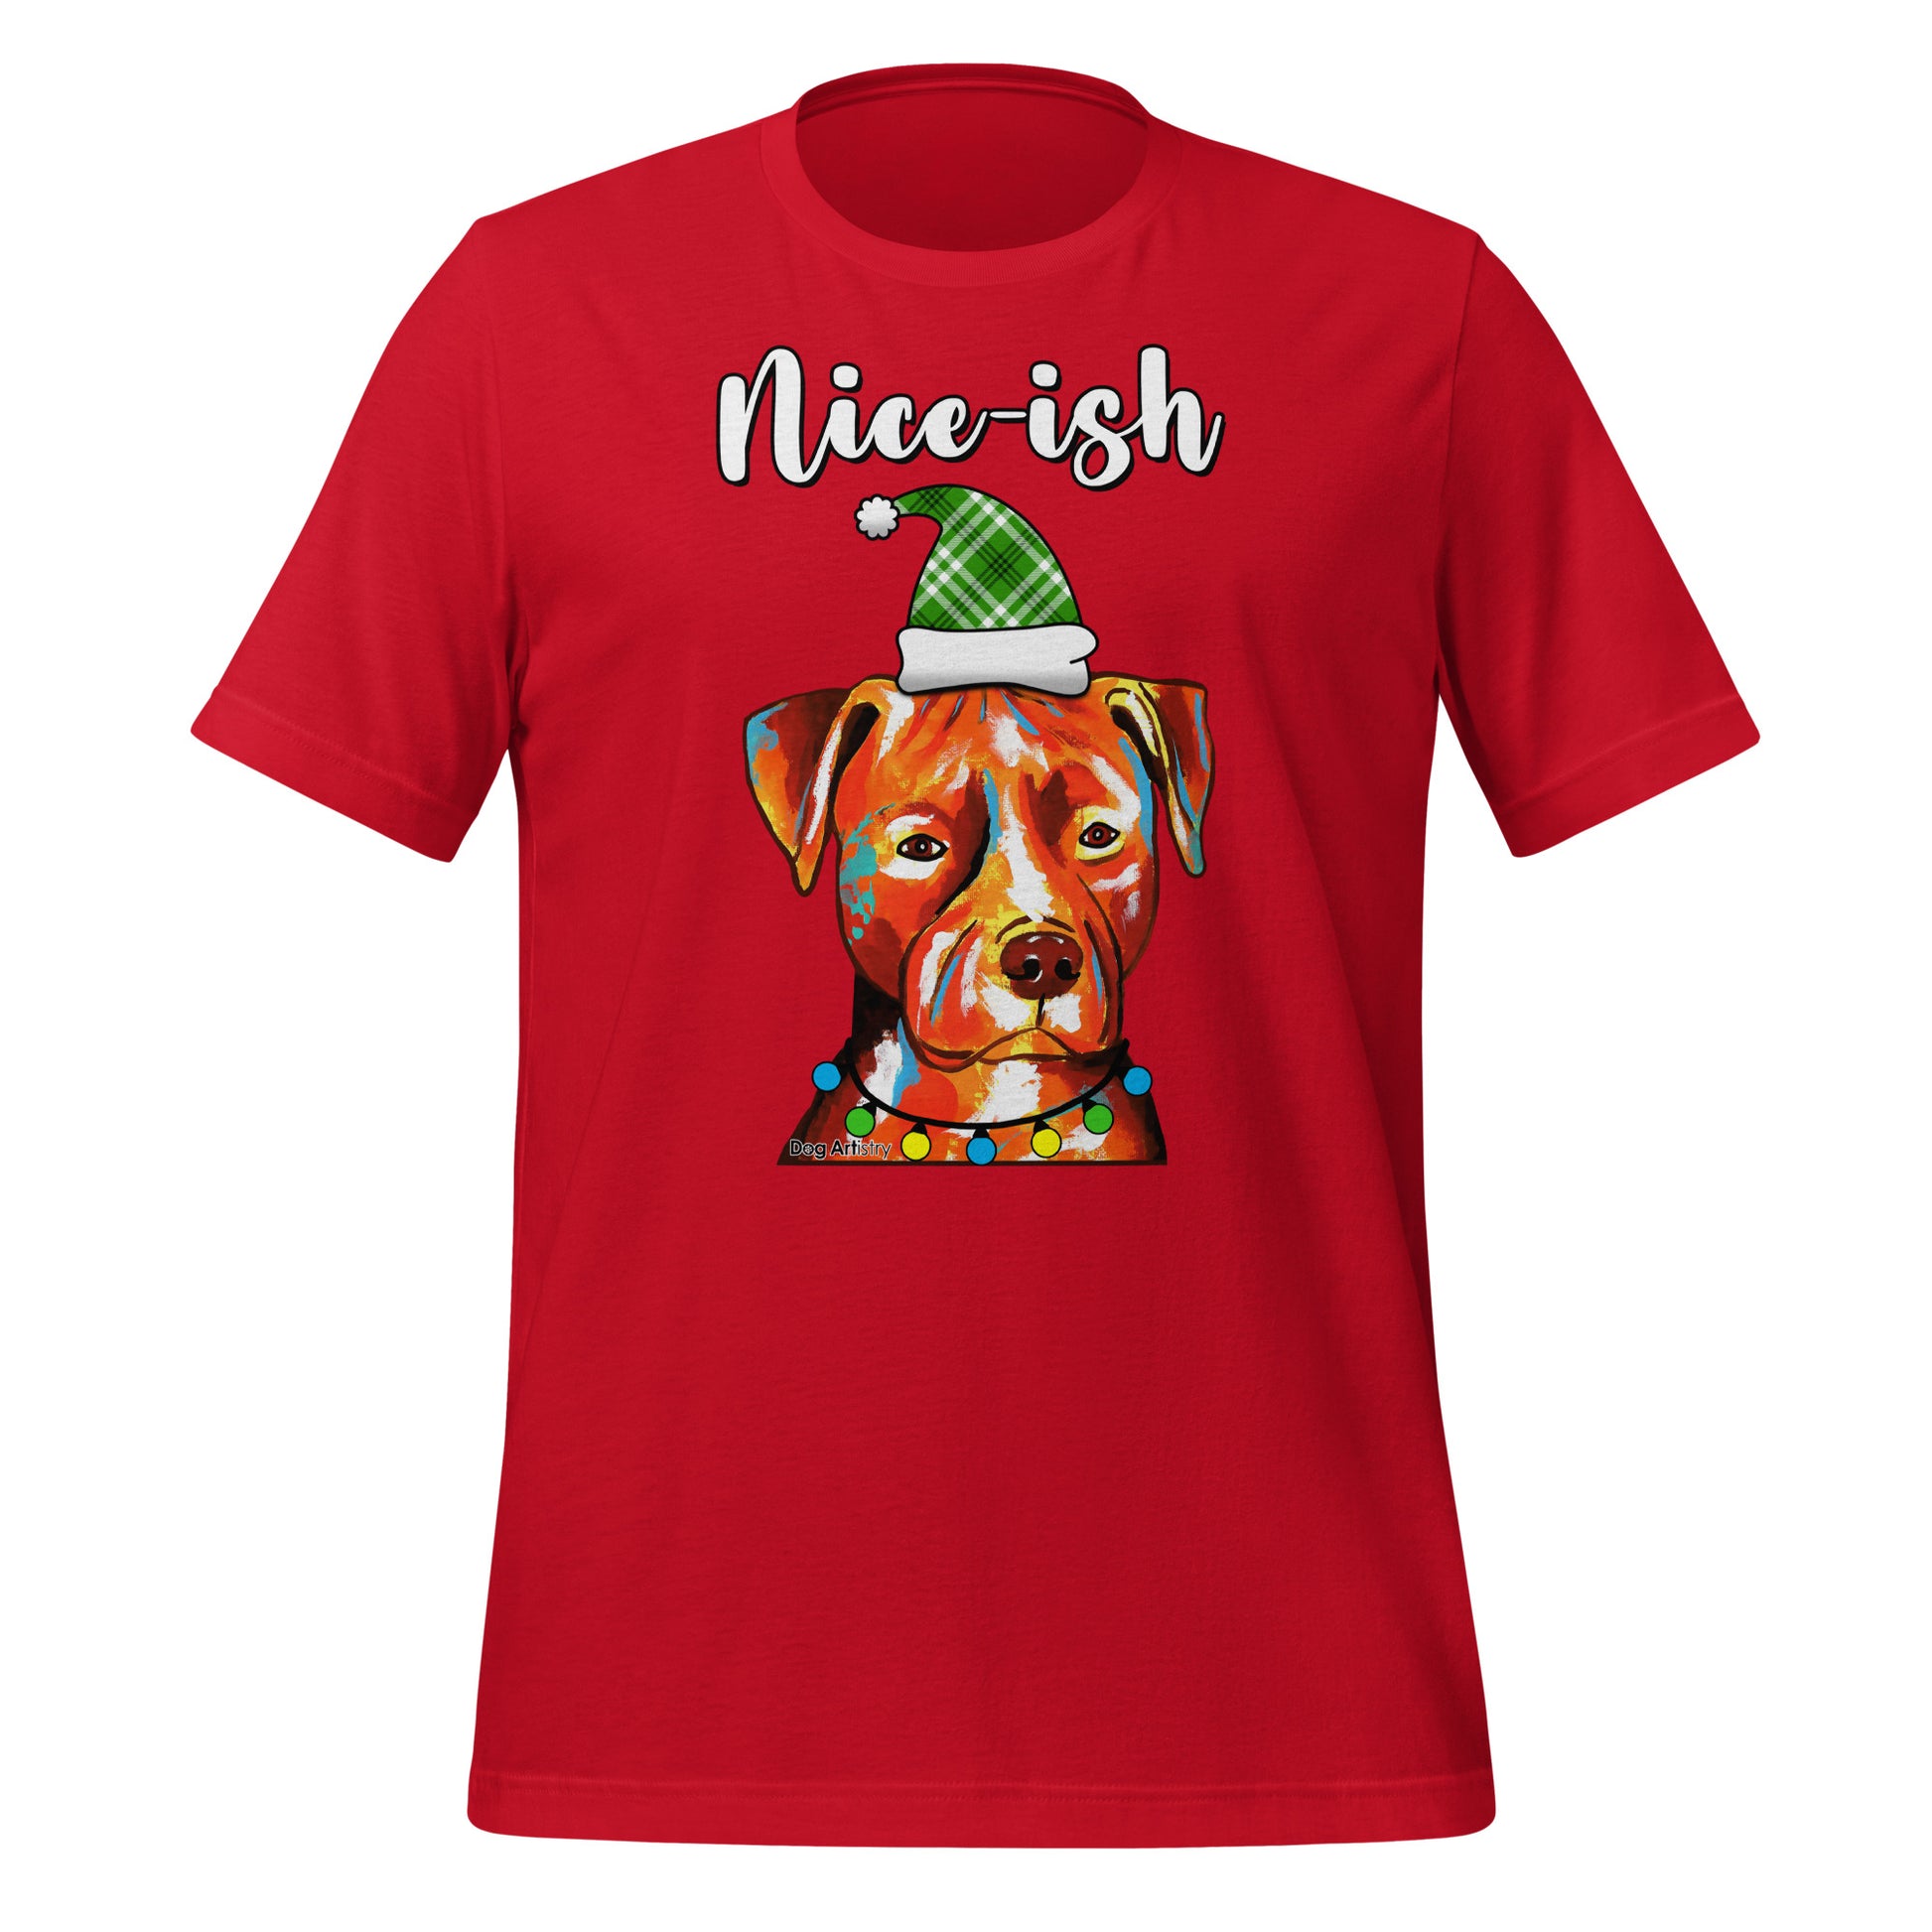 Nice-ish Amstaff - Pit Bull unisex t-shirt red by Dog Artistry.